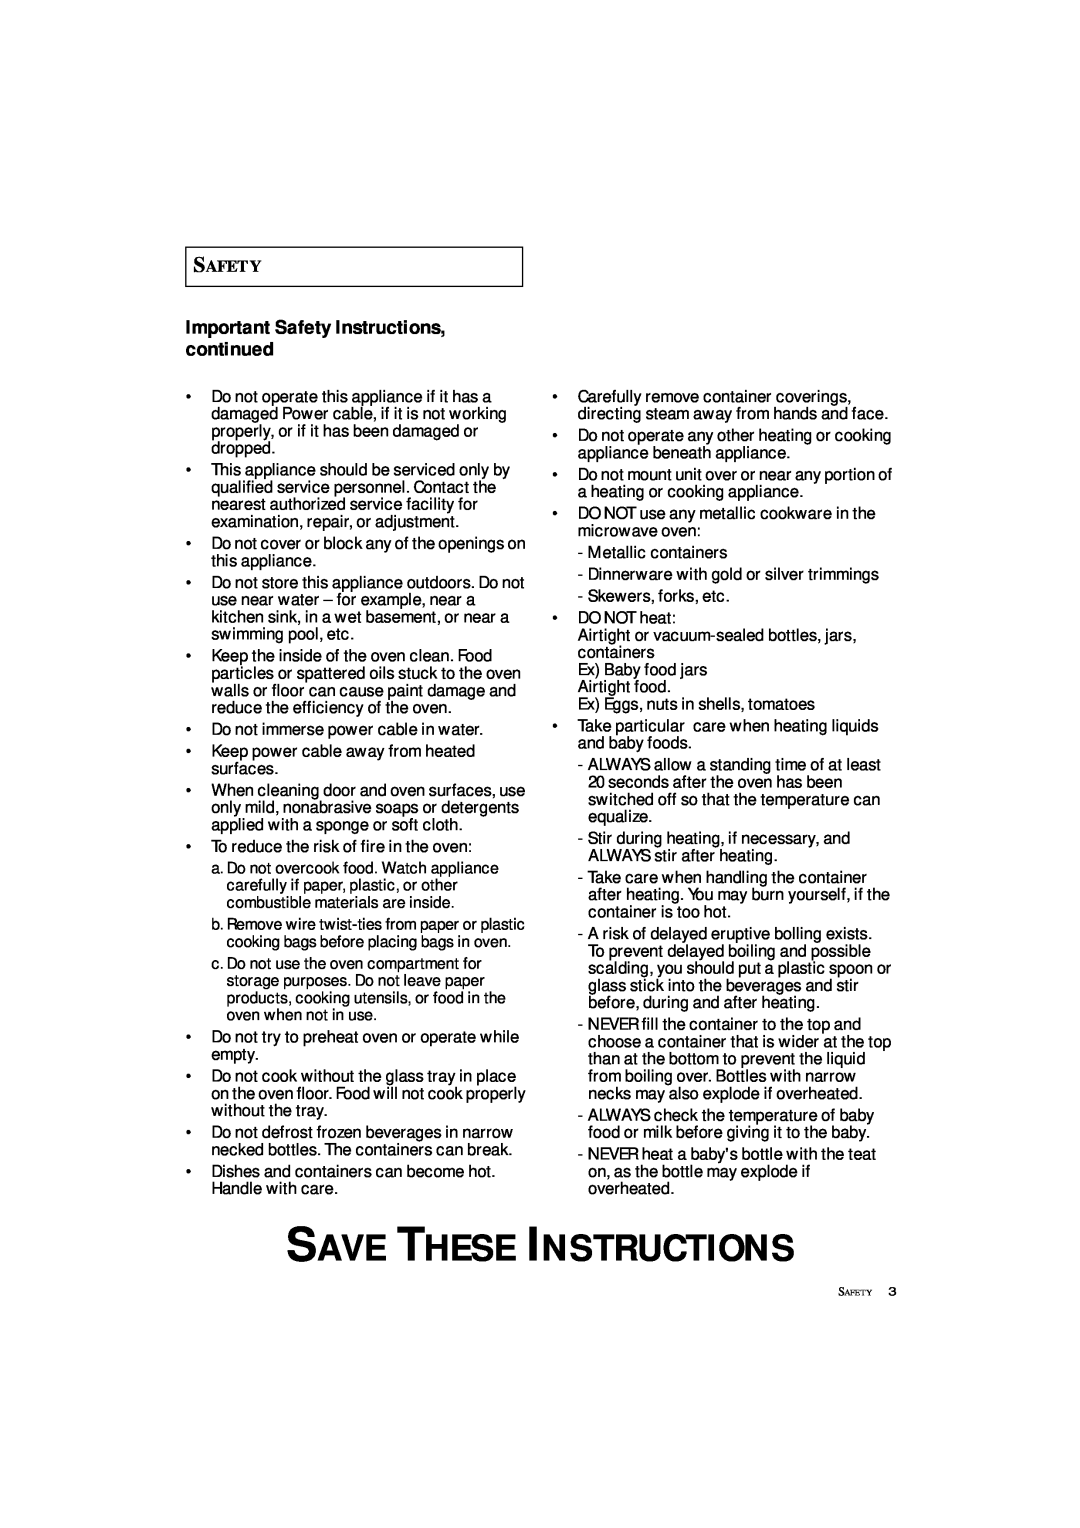 Samsung DE7711 manual Important Safety Instructions, continued, Save These Instructions 